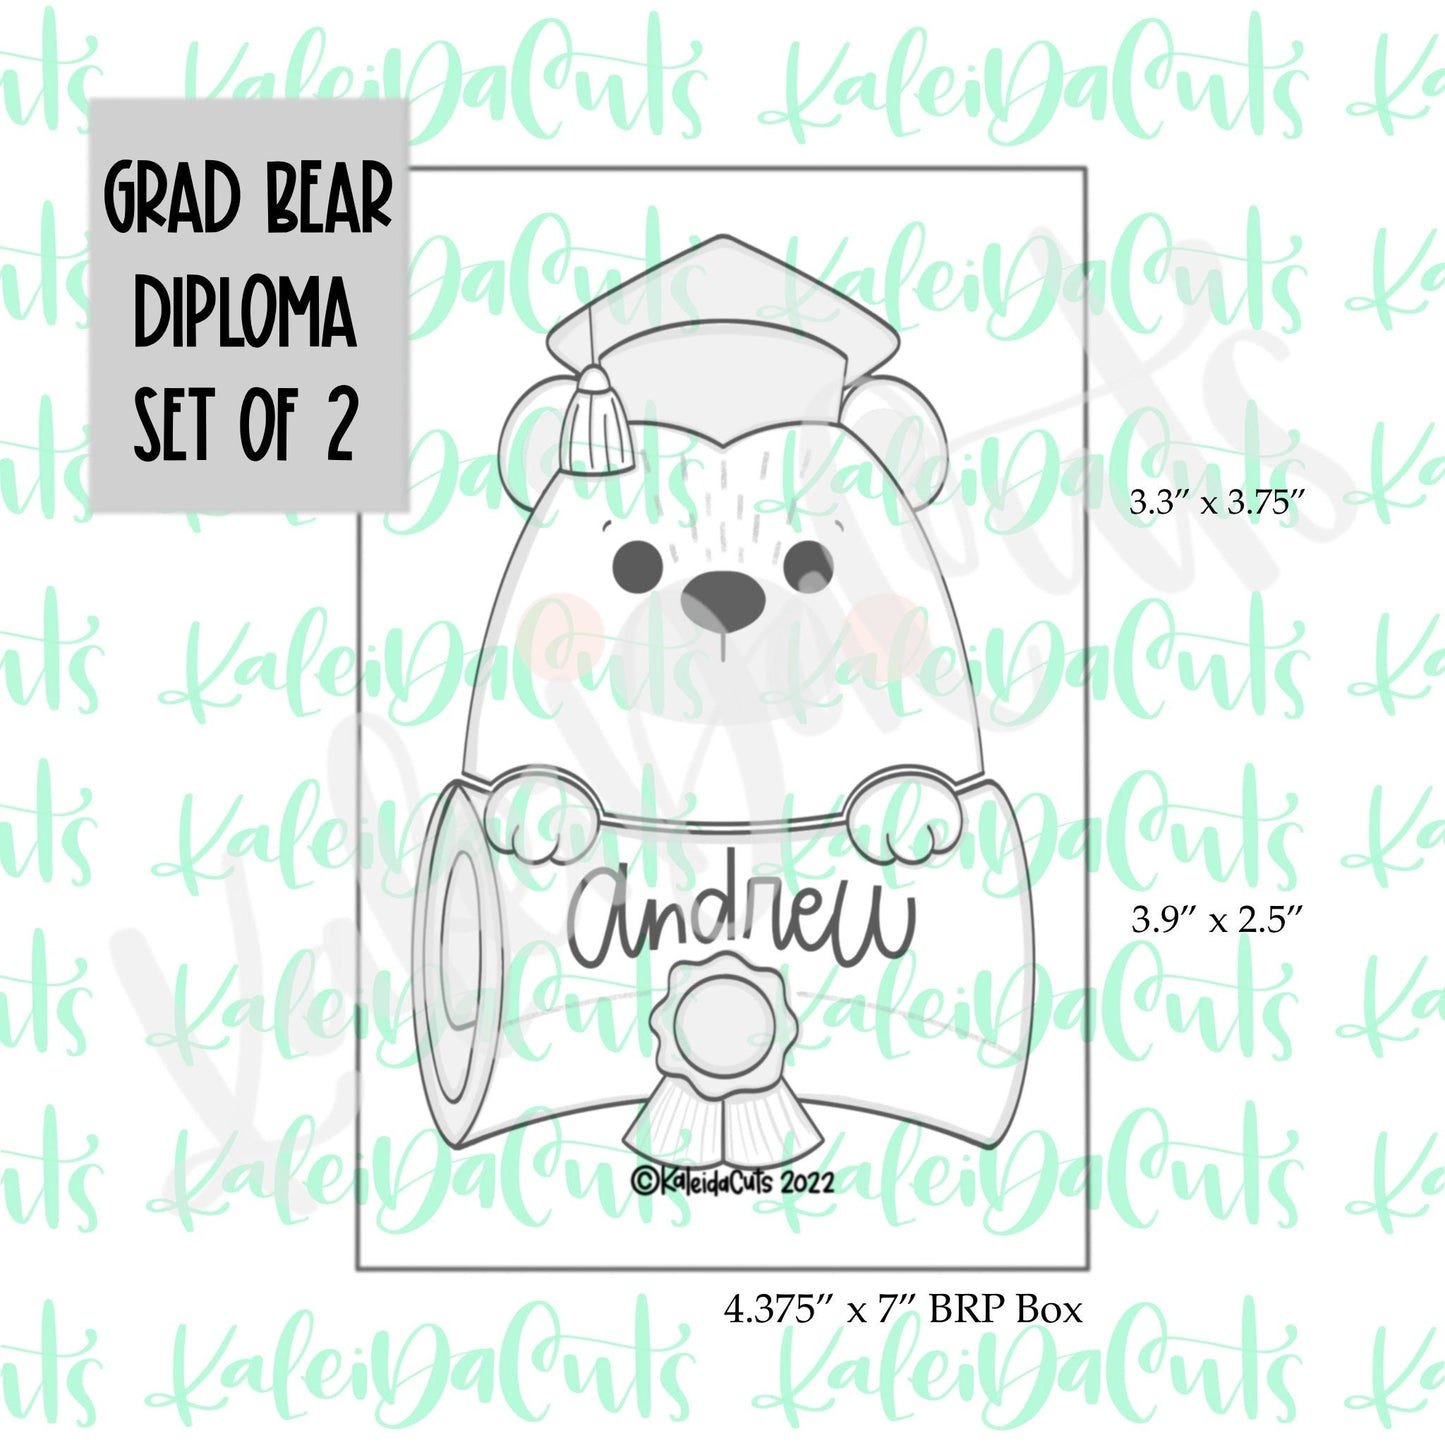 Grad Bear Diploma Set of 2 Cookie Cutters